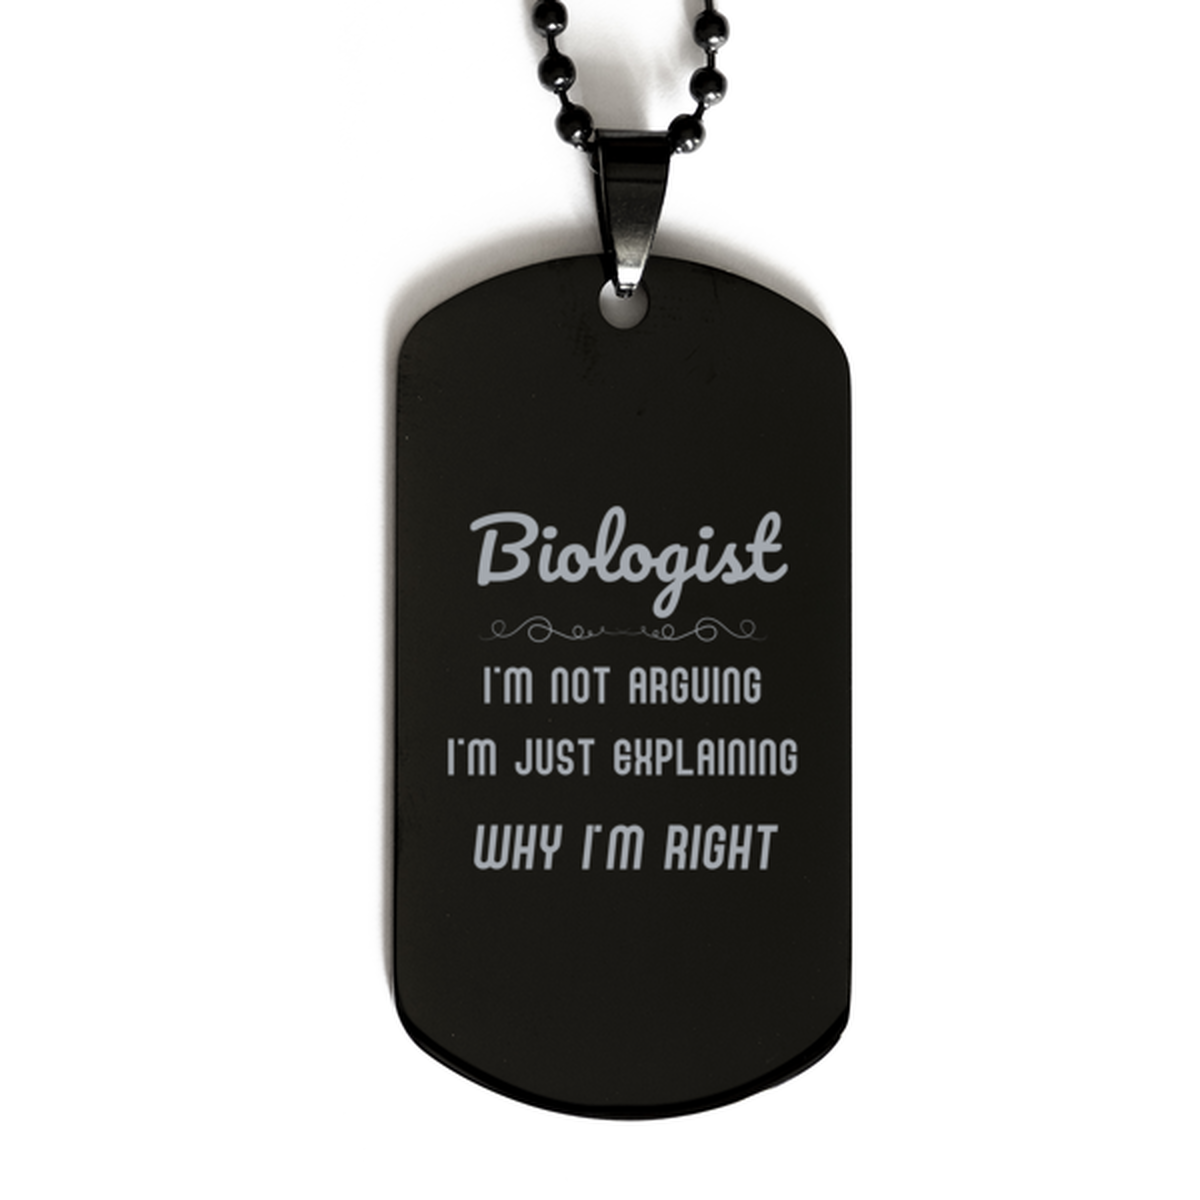 Biologist I'm not Arguing. I'm Just Explaining Why I'm RIGHT Black Dog Tag, Funny Saying Quote Biologist Gifts For Biologist Graduation Birthday Christmas Gifts for Men Women Coworker